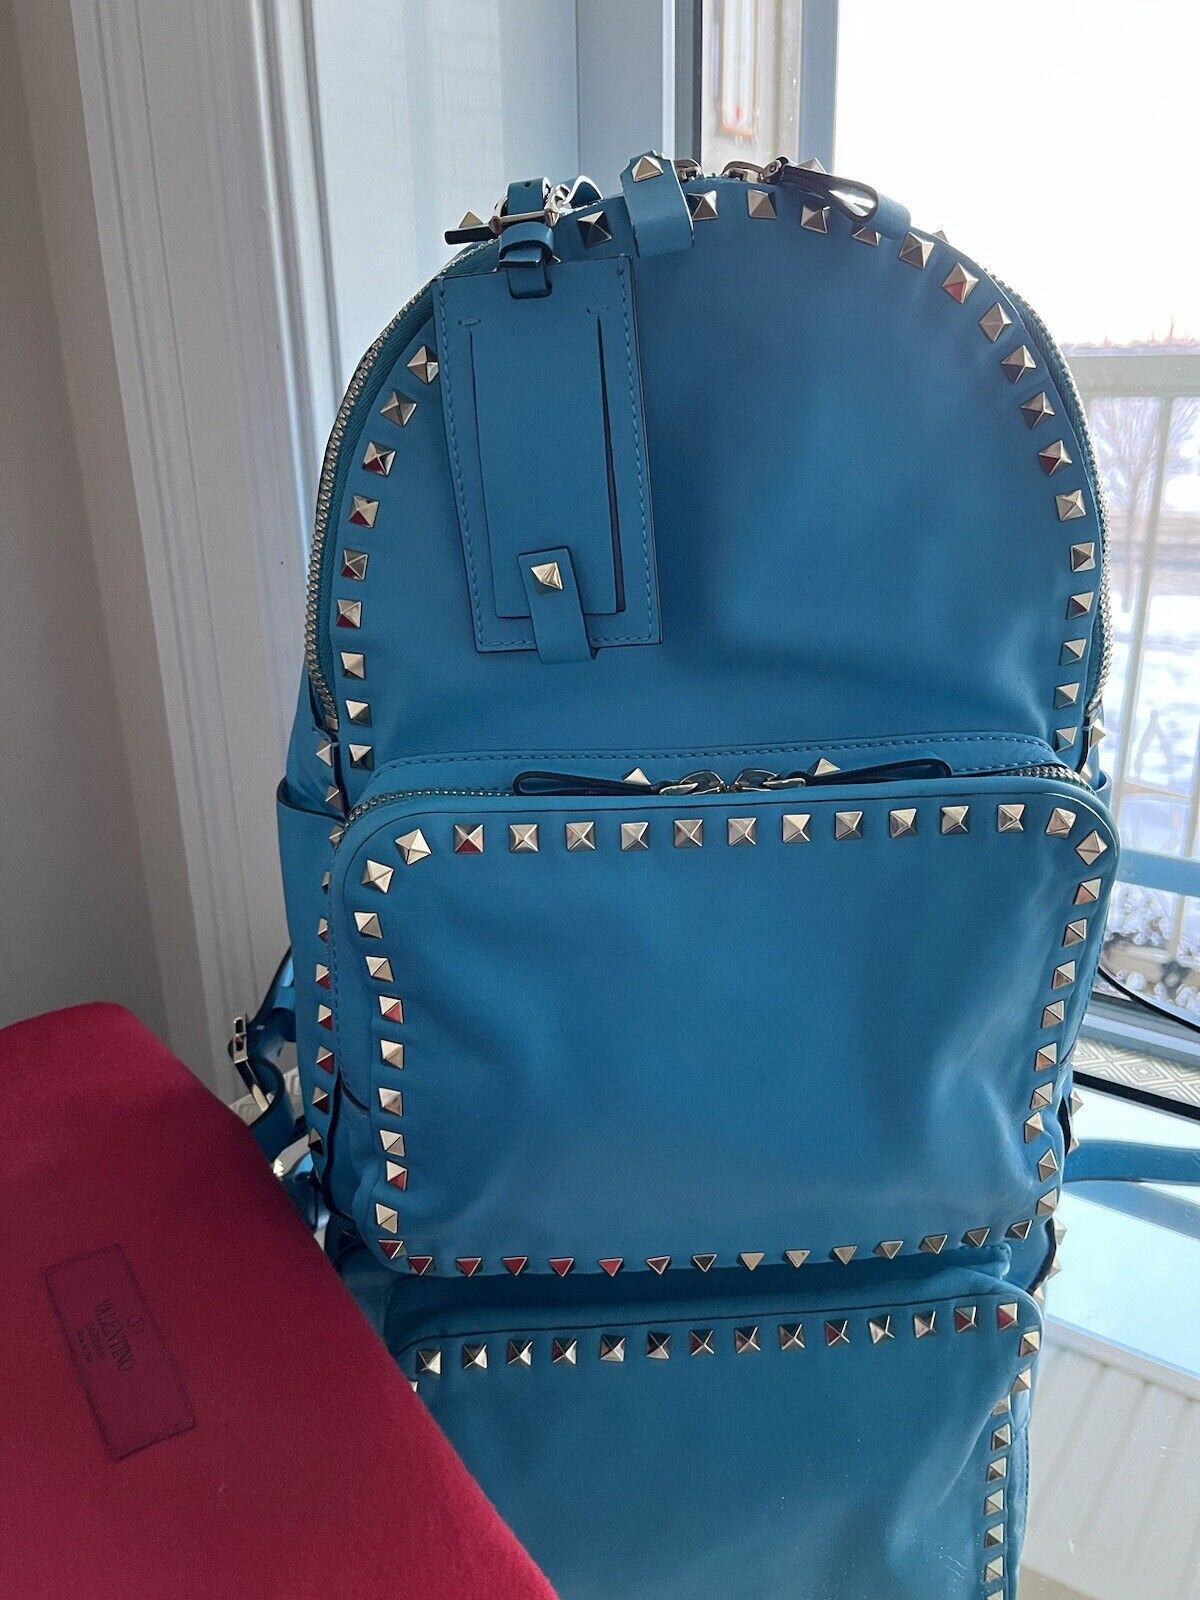 authentic VALENTINO MEDIUM ROCKSTUD BACKPACK sky blue excellent condition w/dust